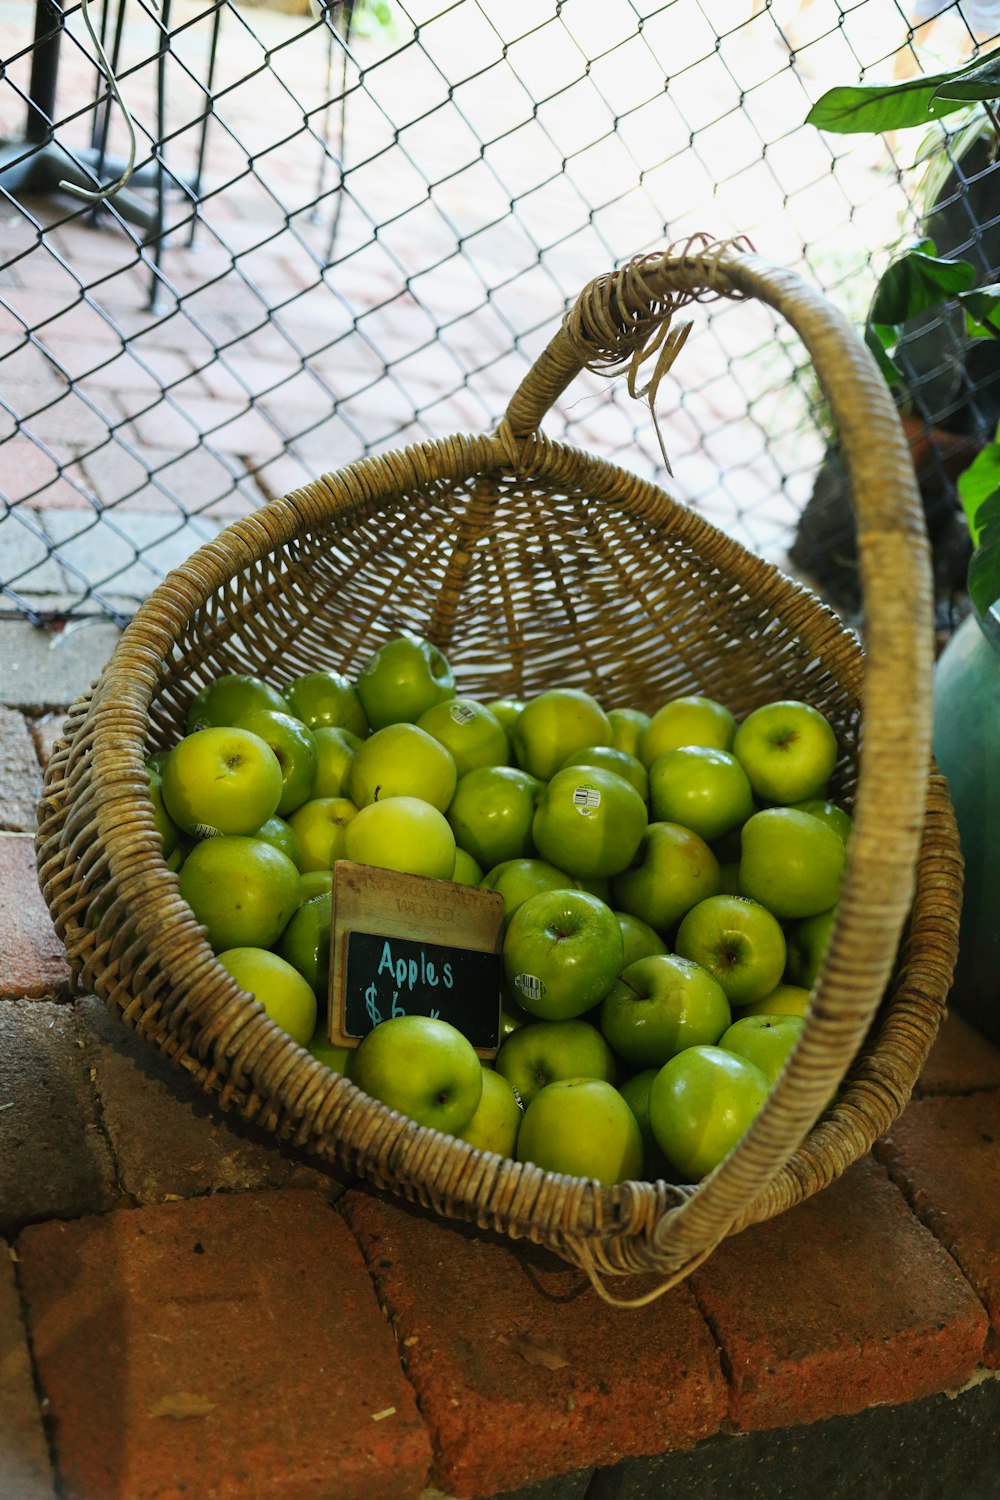 a basket full of green apples sitting on a brick floor